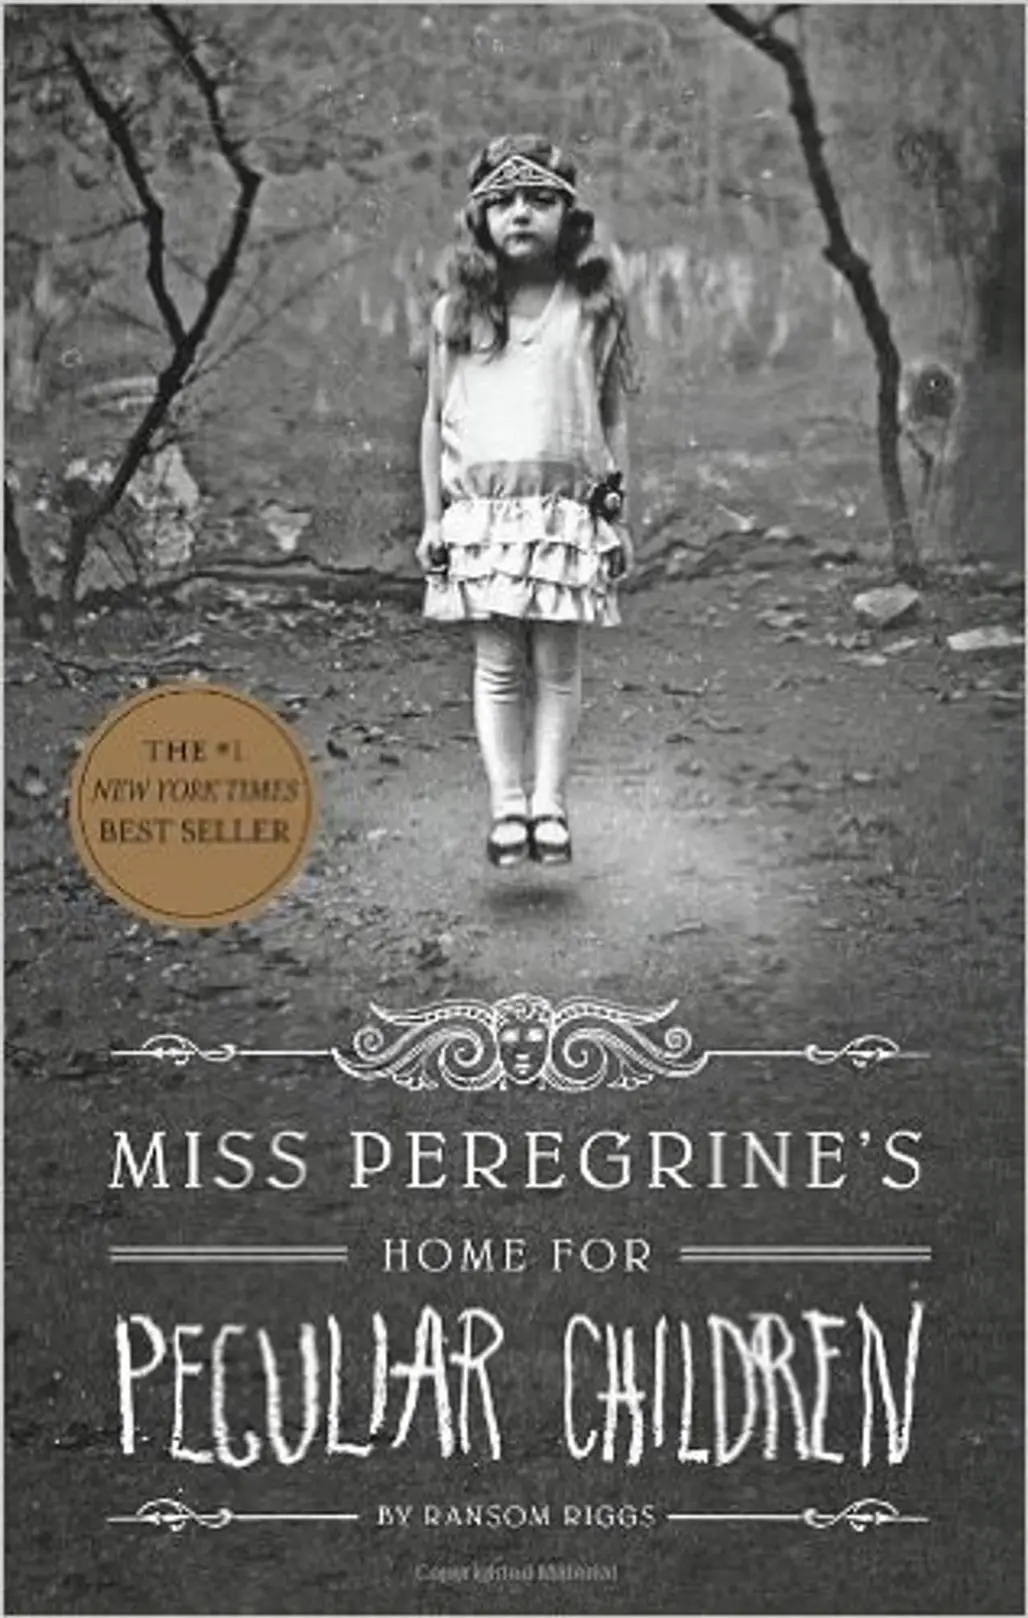 Miss Peregrine's Home for Peculiar Children (Ransom Riggs)